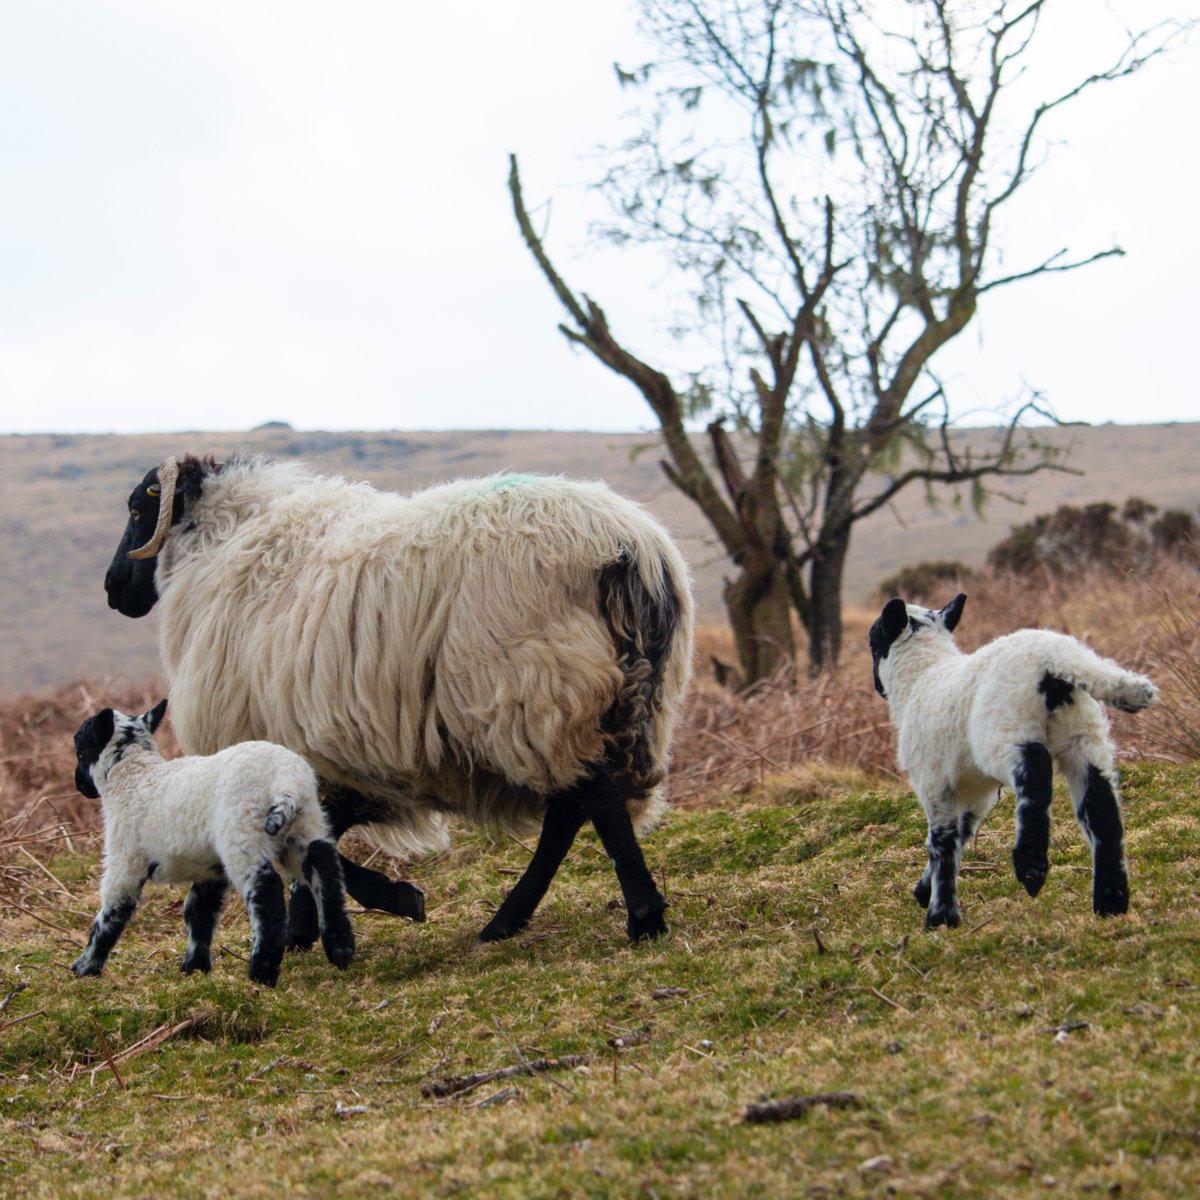 Just the presence of an unknown dog can be stressful for sheep, ground-nesting birds, and other livestock 🐑 #TakeTheLead from March 1 – July 31 to ensure everyone can appreciate the wonders of Dartmoor, while respecting its wildlife and habitat 💚